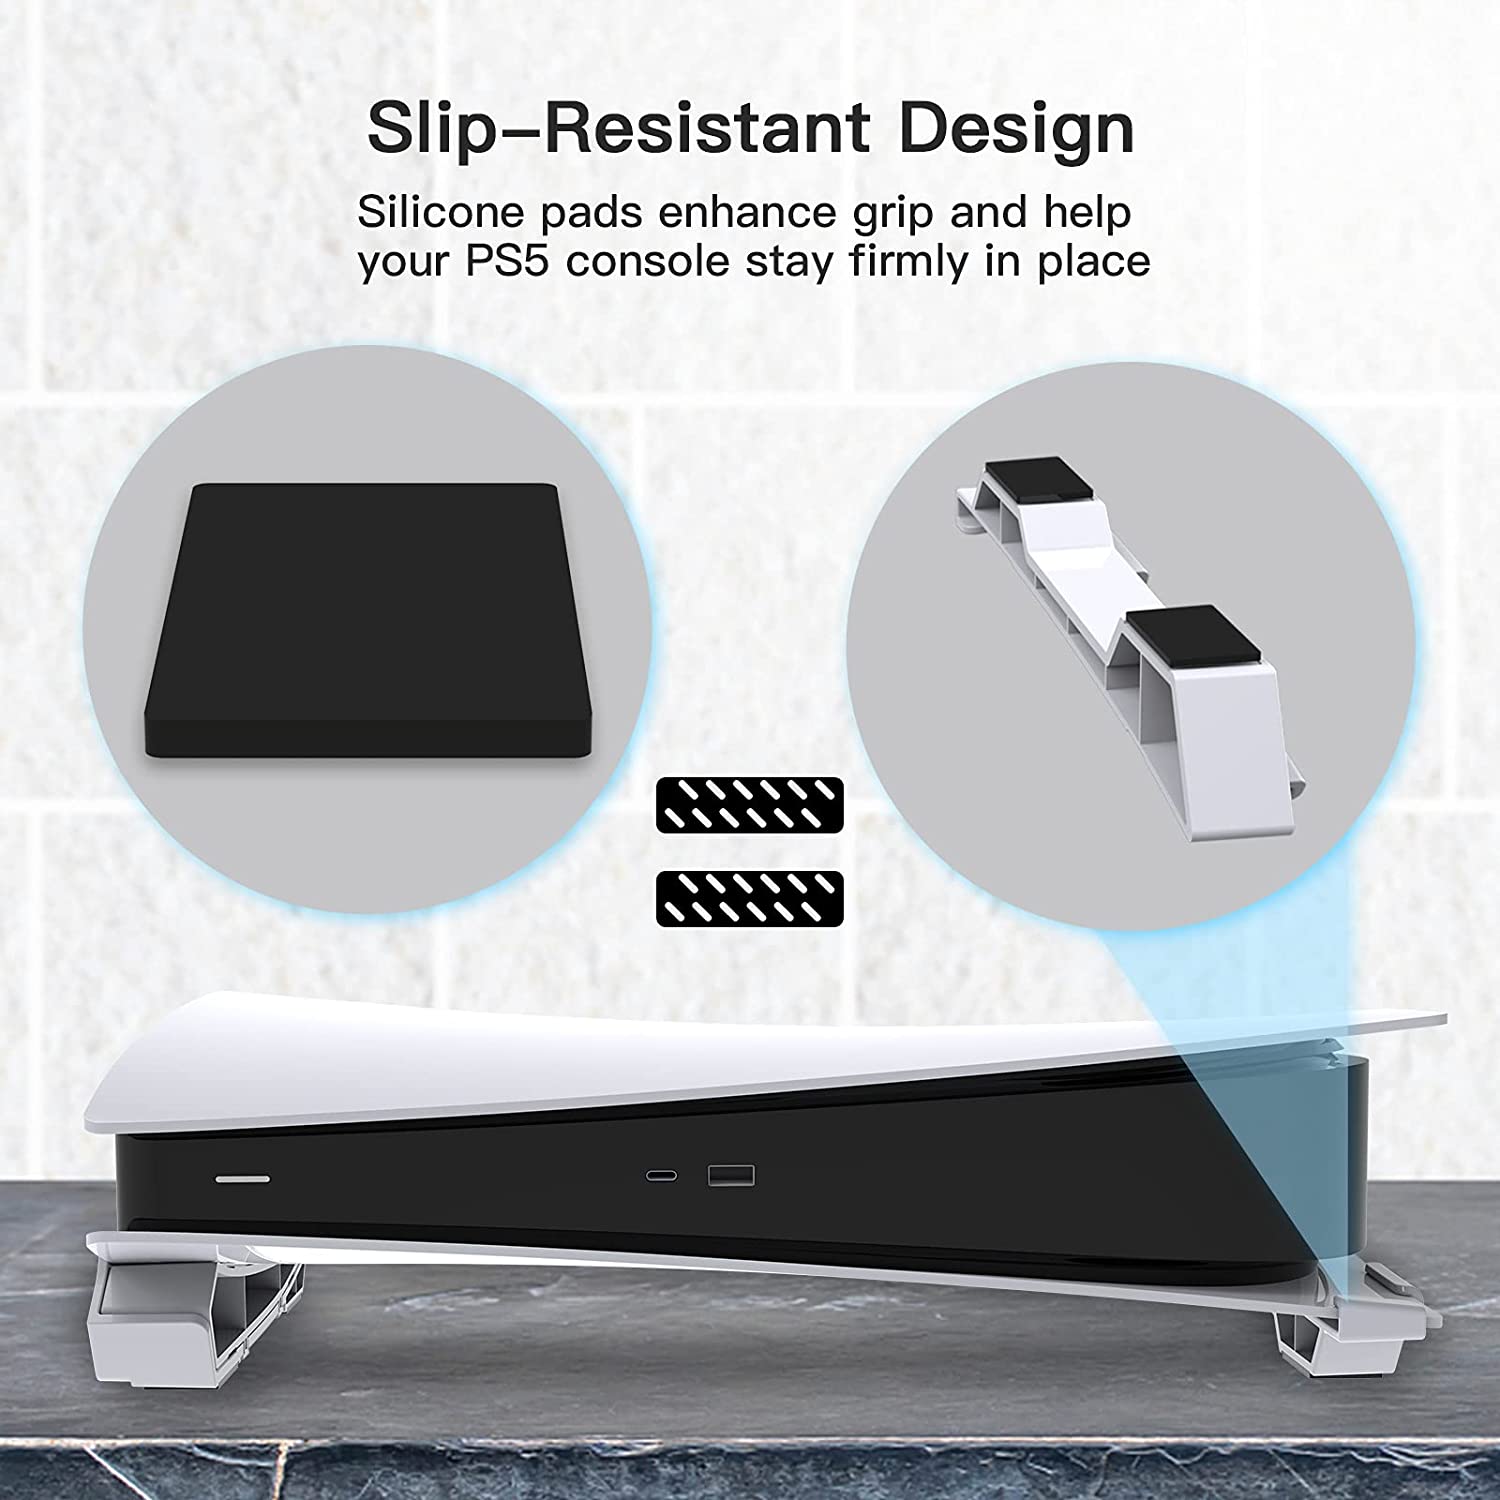 Black silicone pads on the bottom of the stand provide anti-slip functionality. 